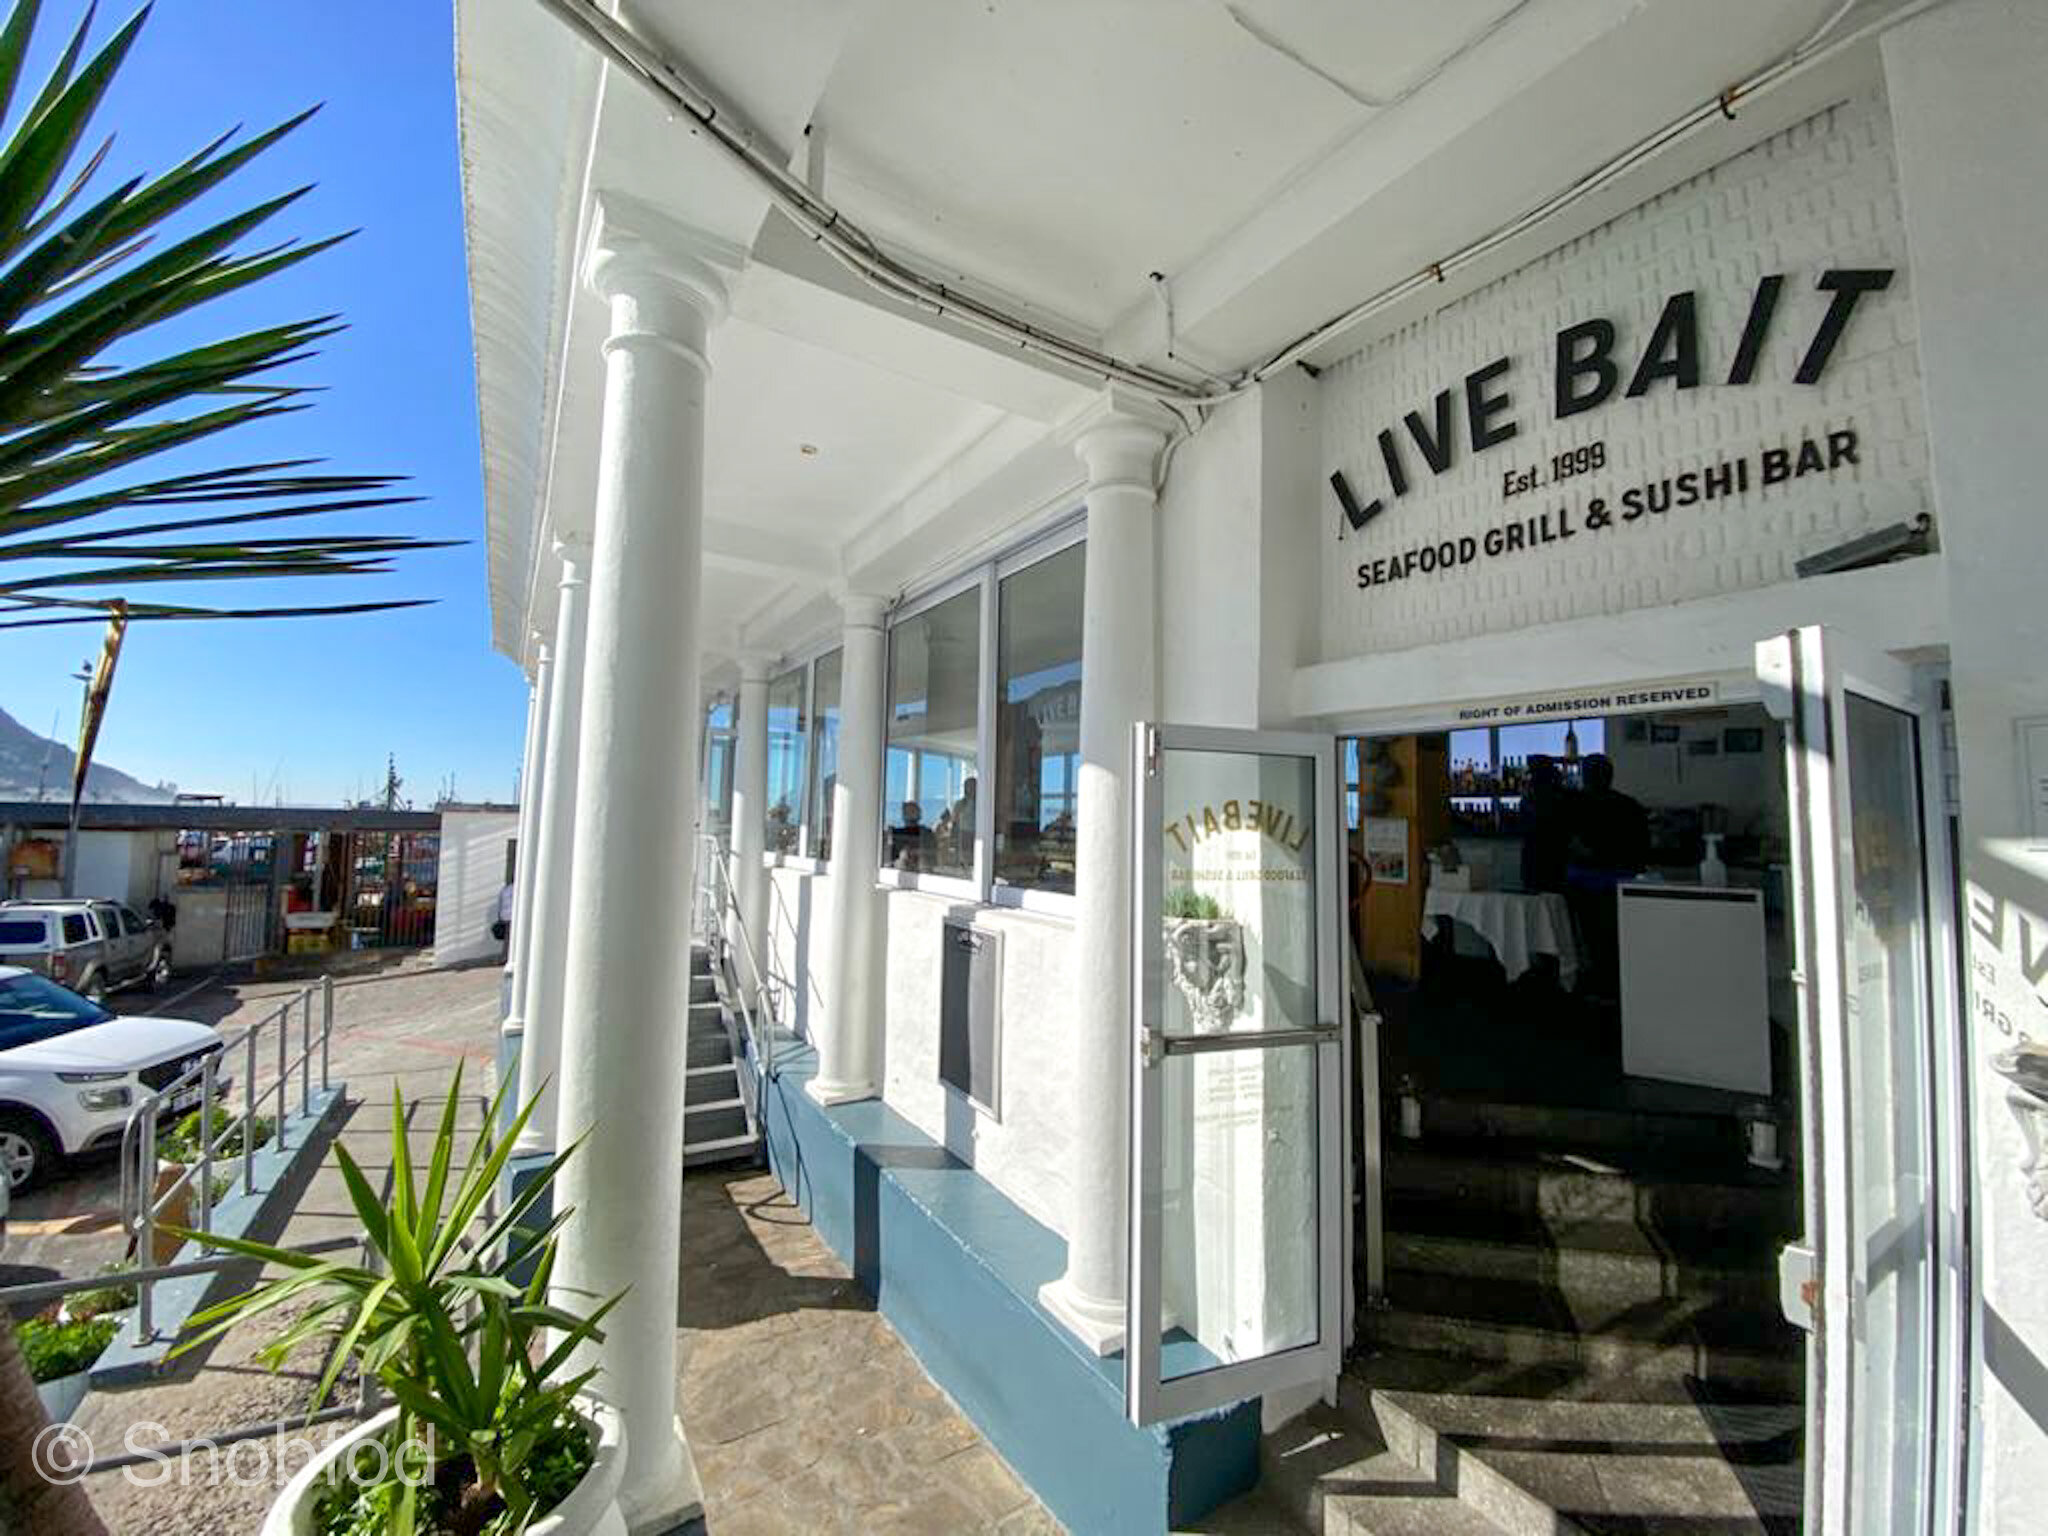 Live Bait Kalk Bay: It was a quickie, and thank goodness for that